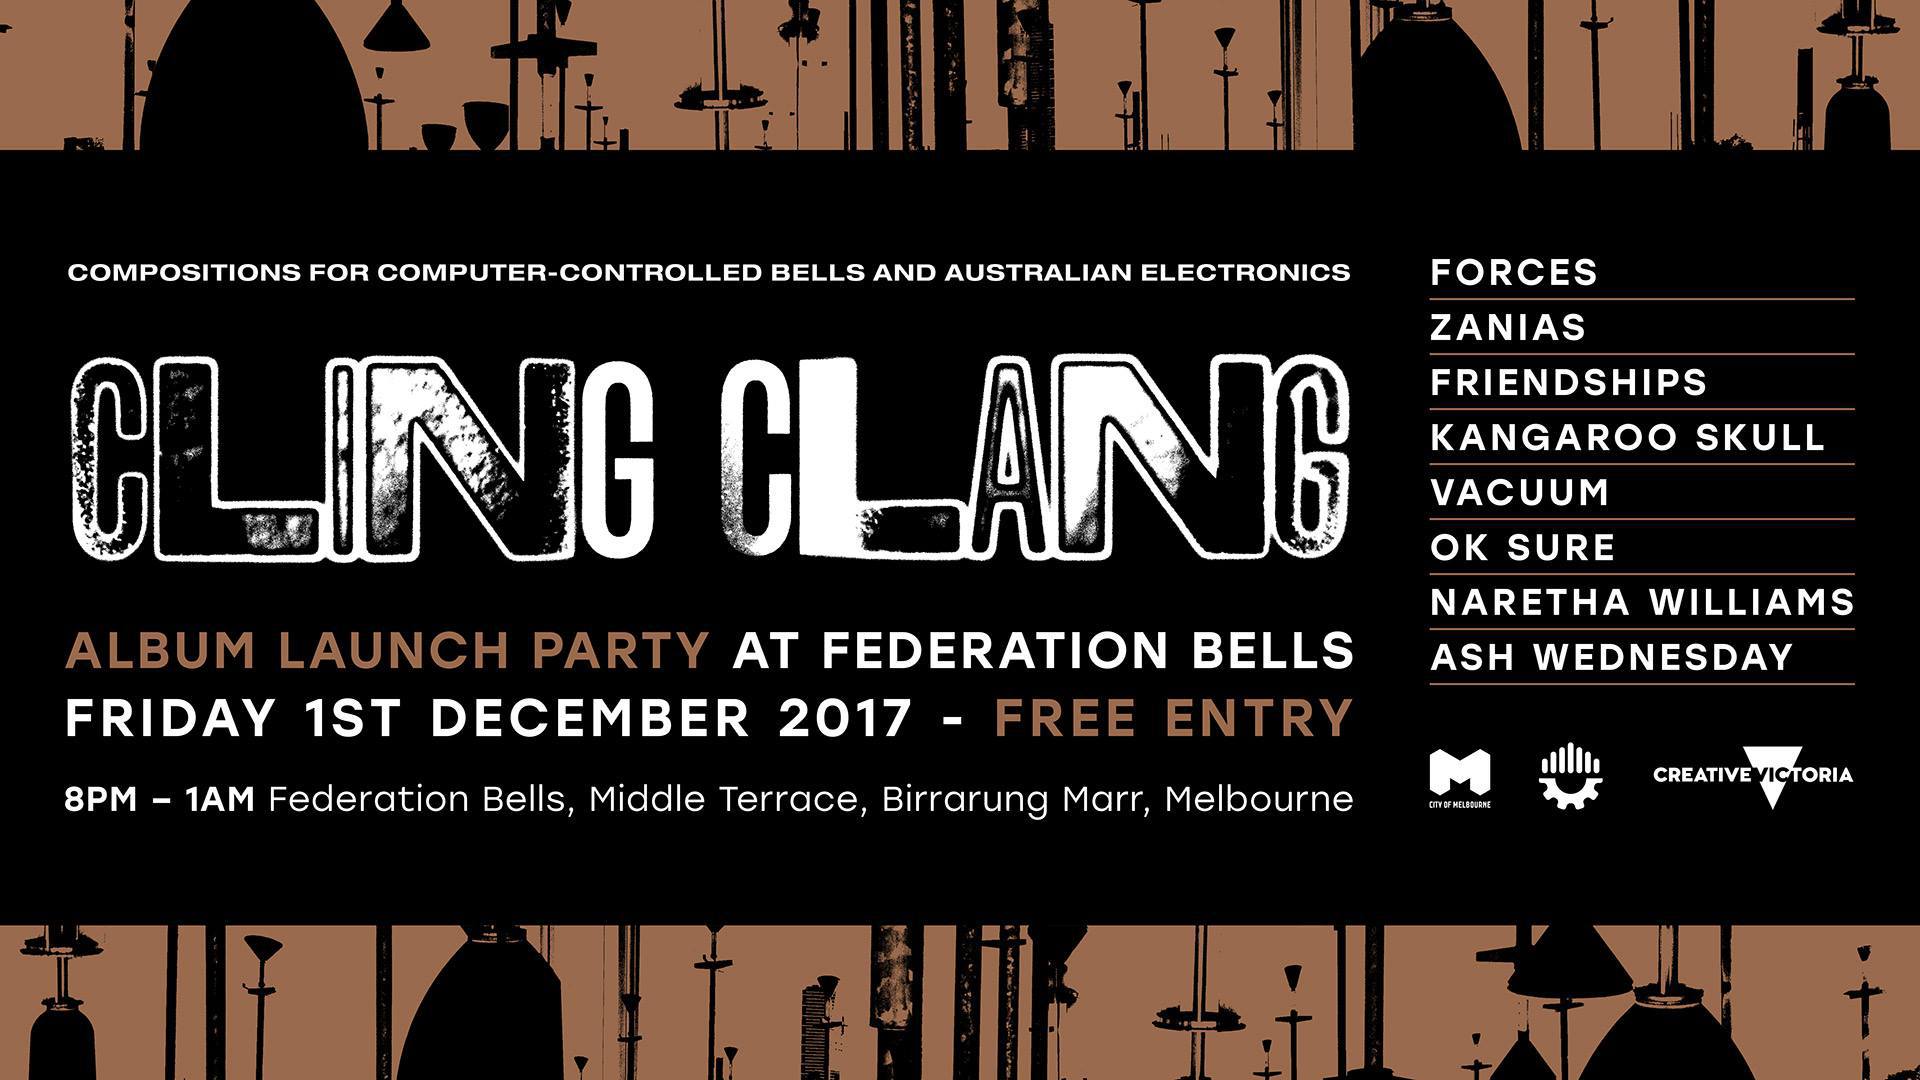 Cling Clang Album Launch Announced Featuring: Forces, Zanias ...